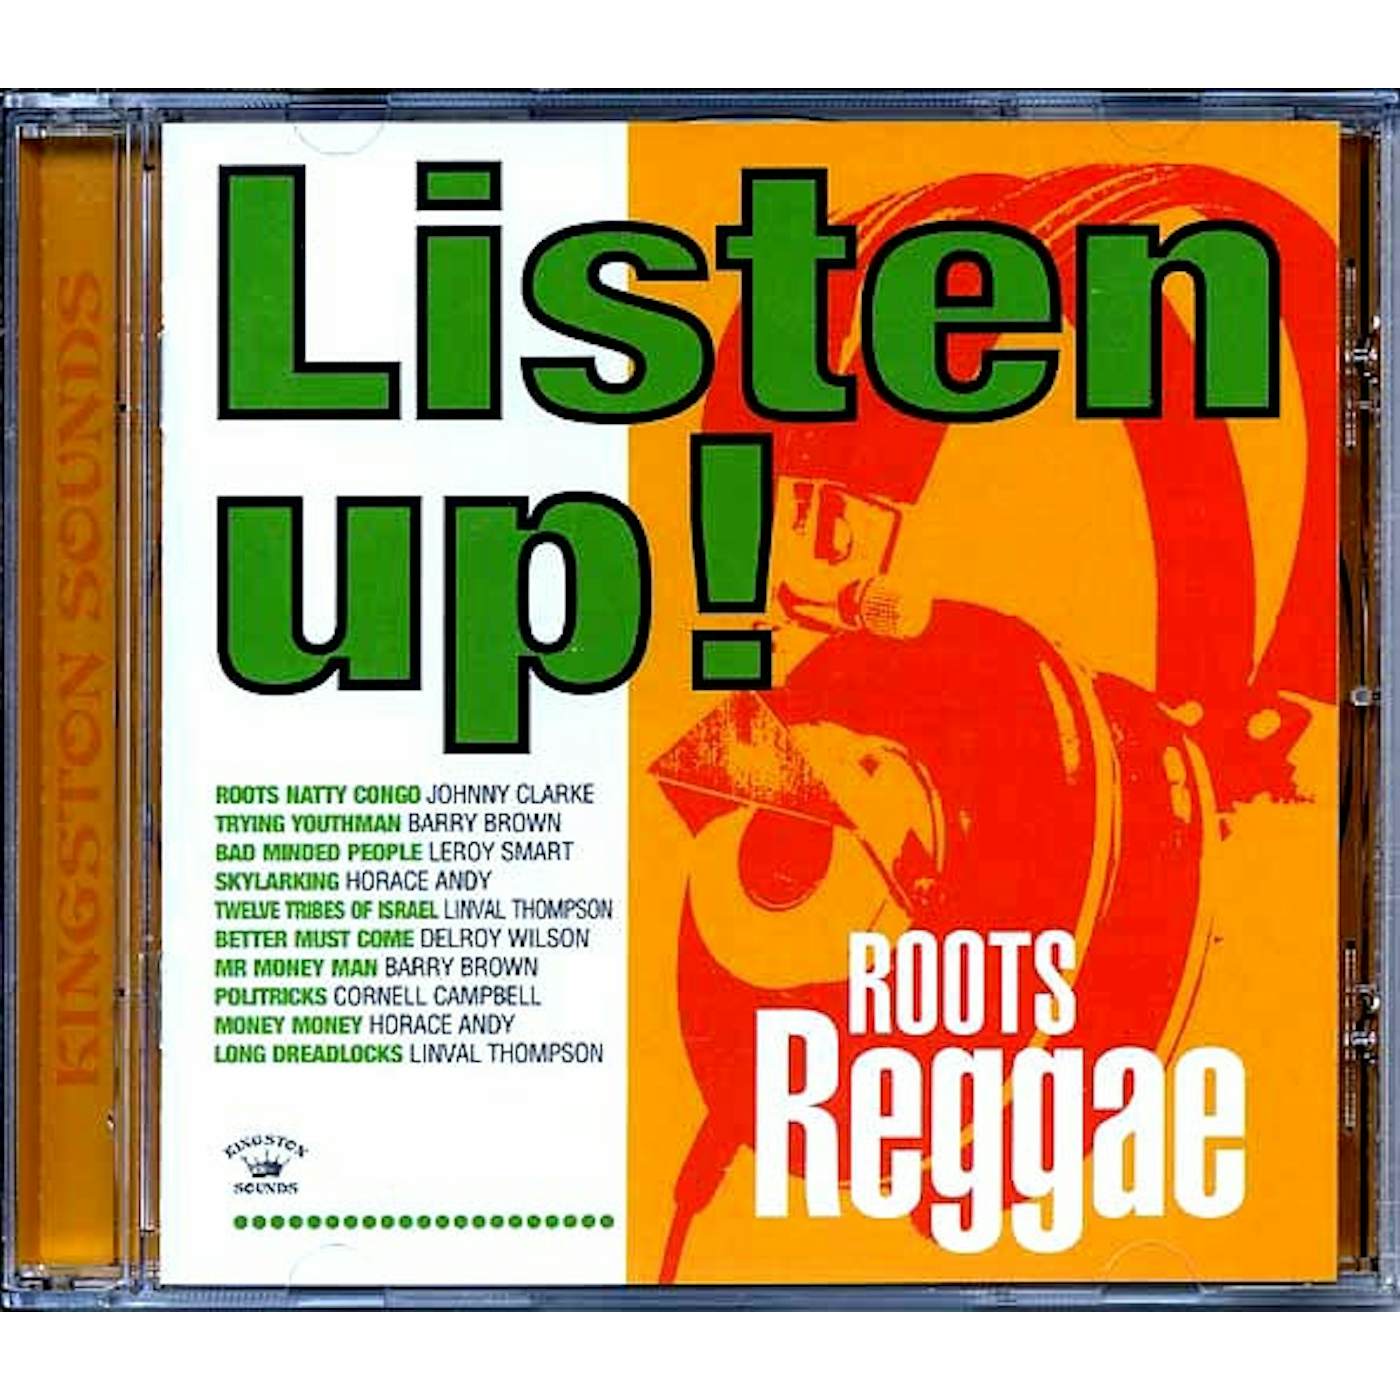 Barry Brown, Linval Thompson, Johnny Clarke, Etc.  CD -  Listen Up: Roots Reggae